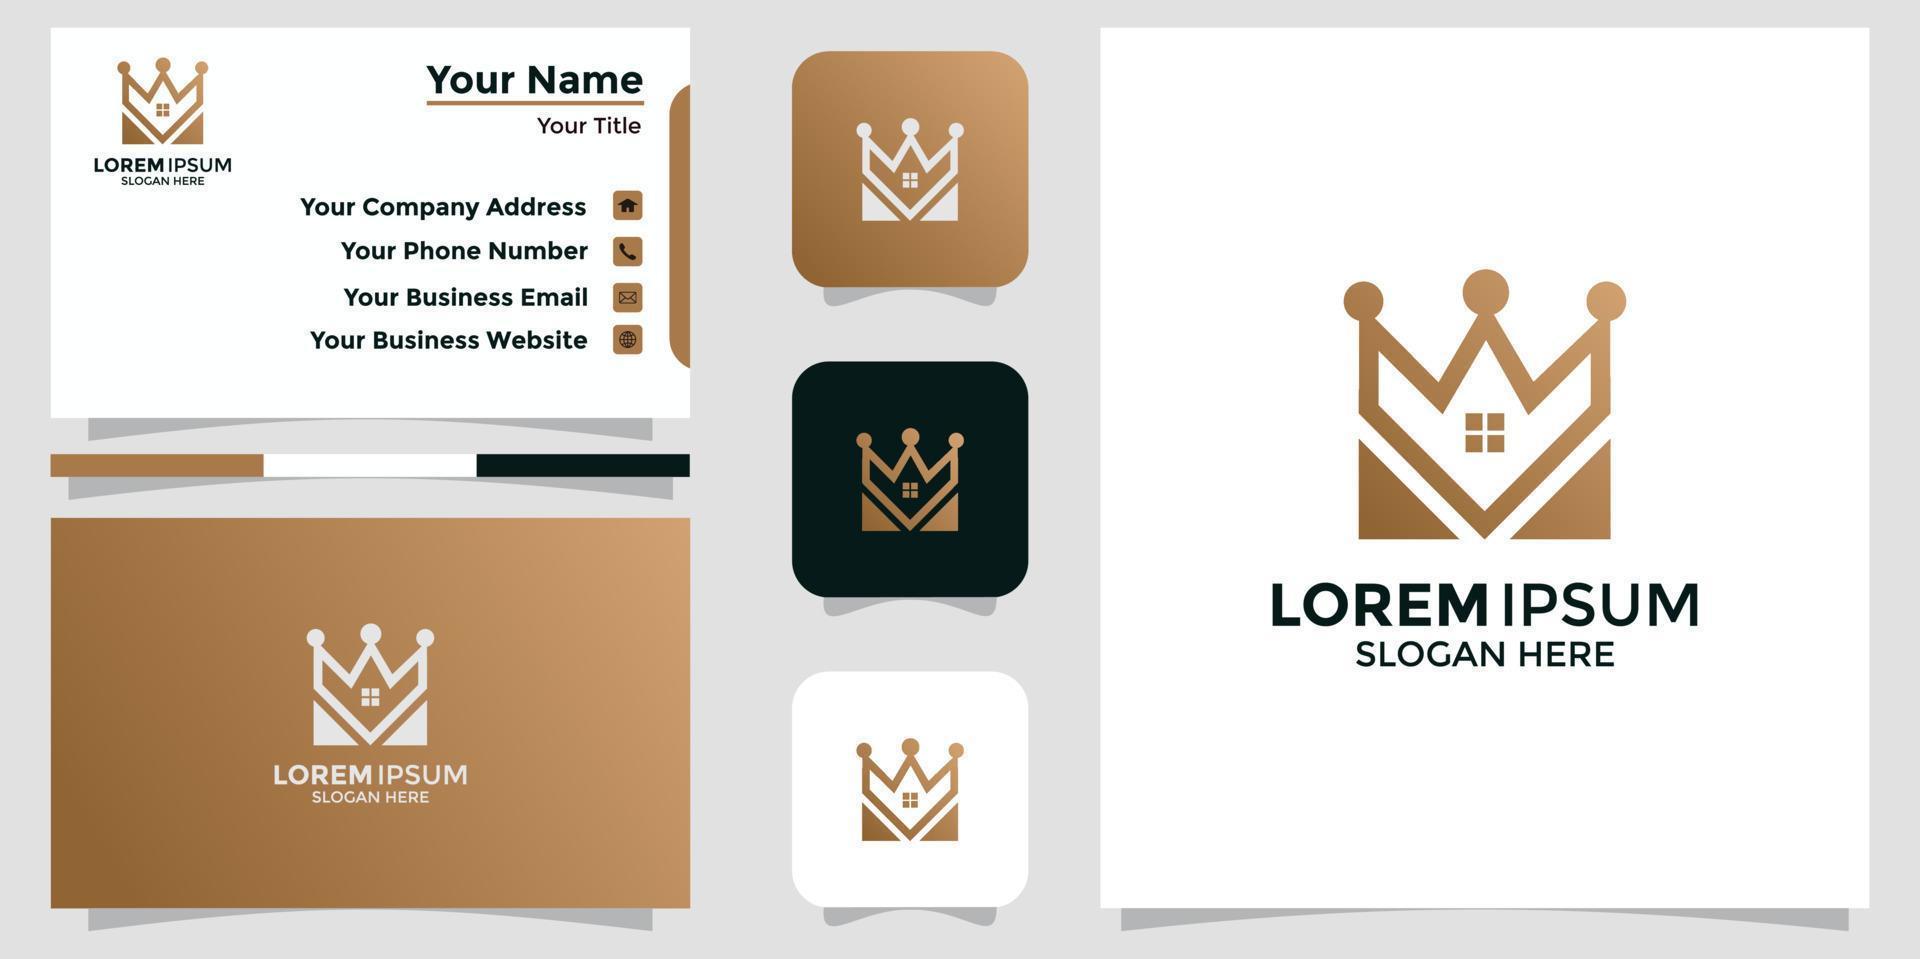 house design logo combination with crown vector